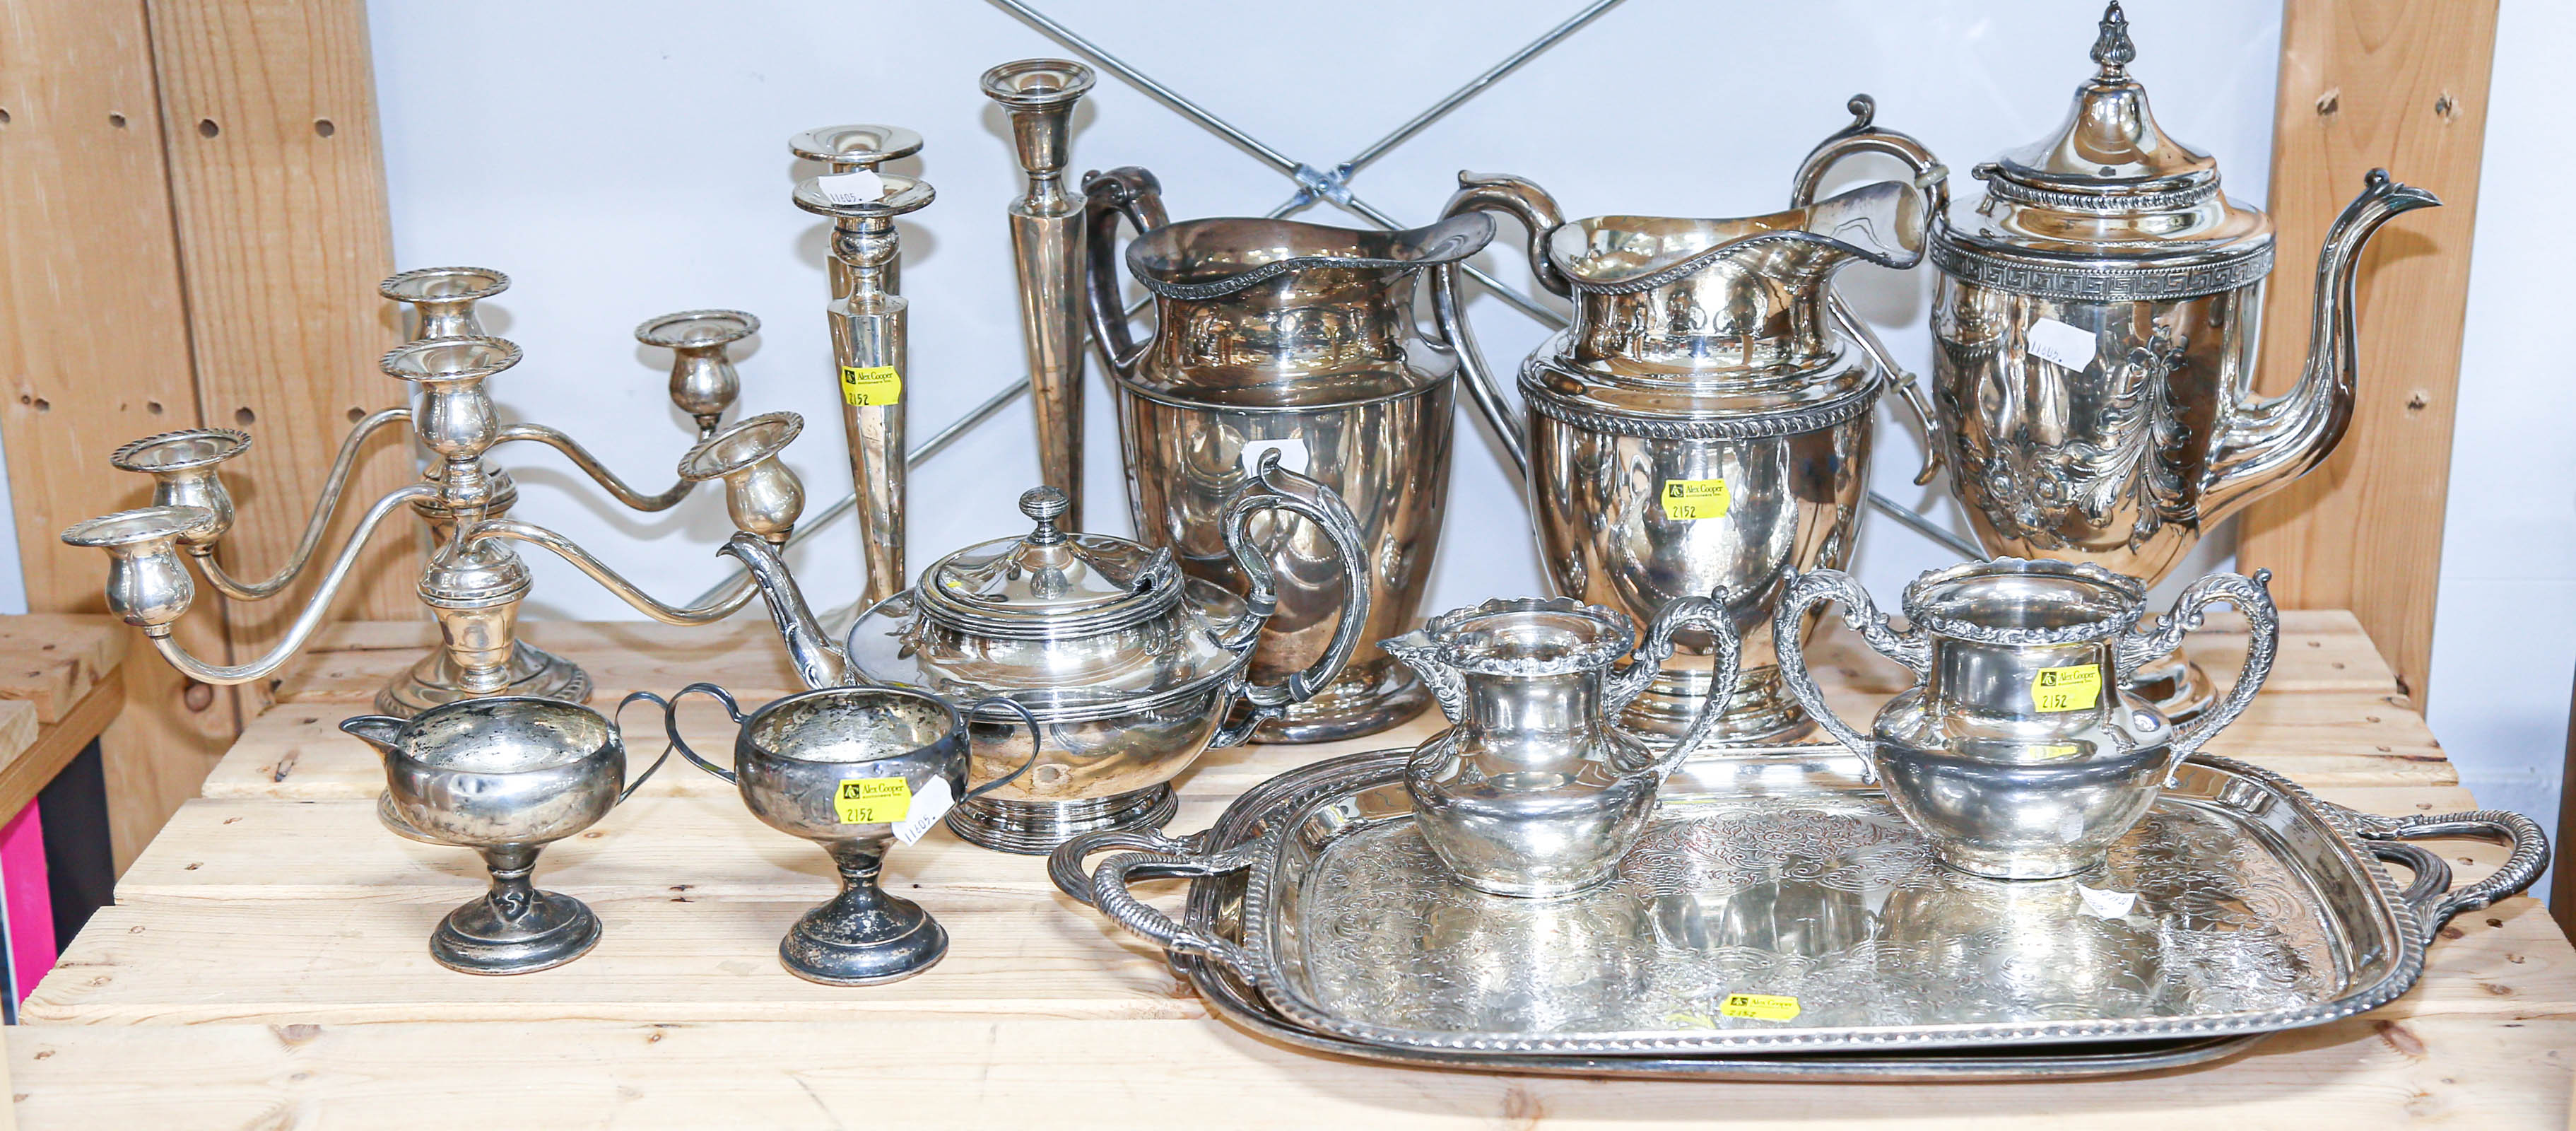 ASSORTED SILVER PLATE STERLING 369bfb